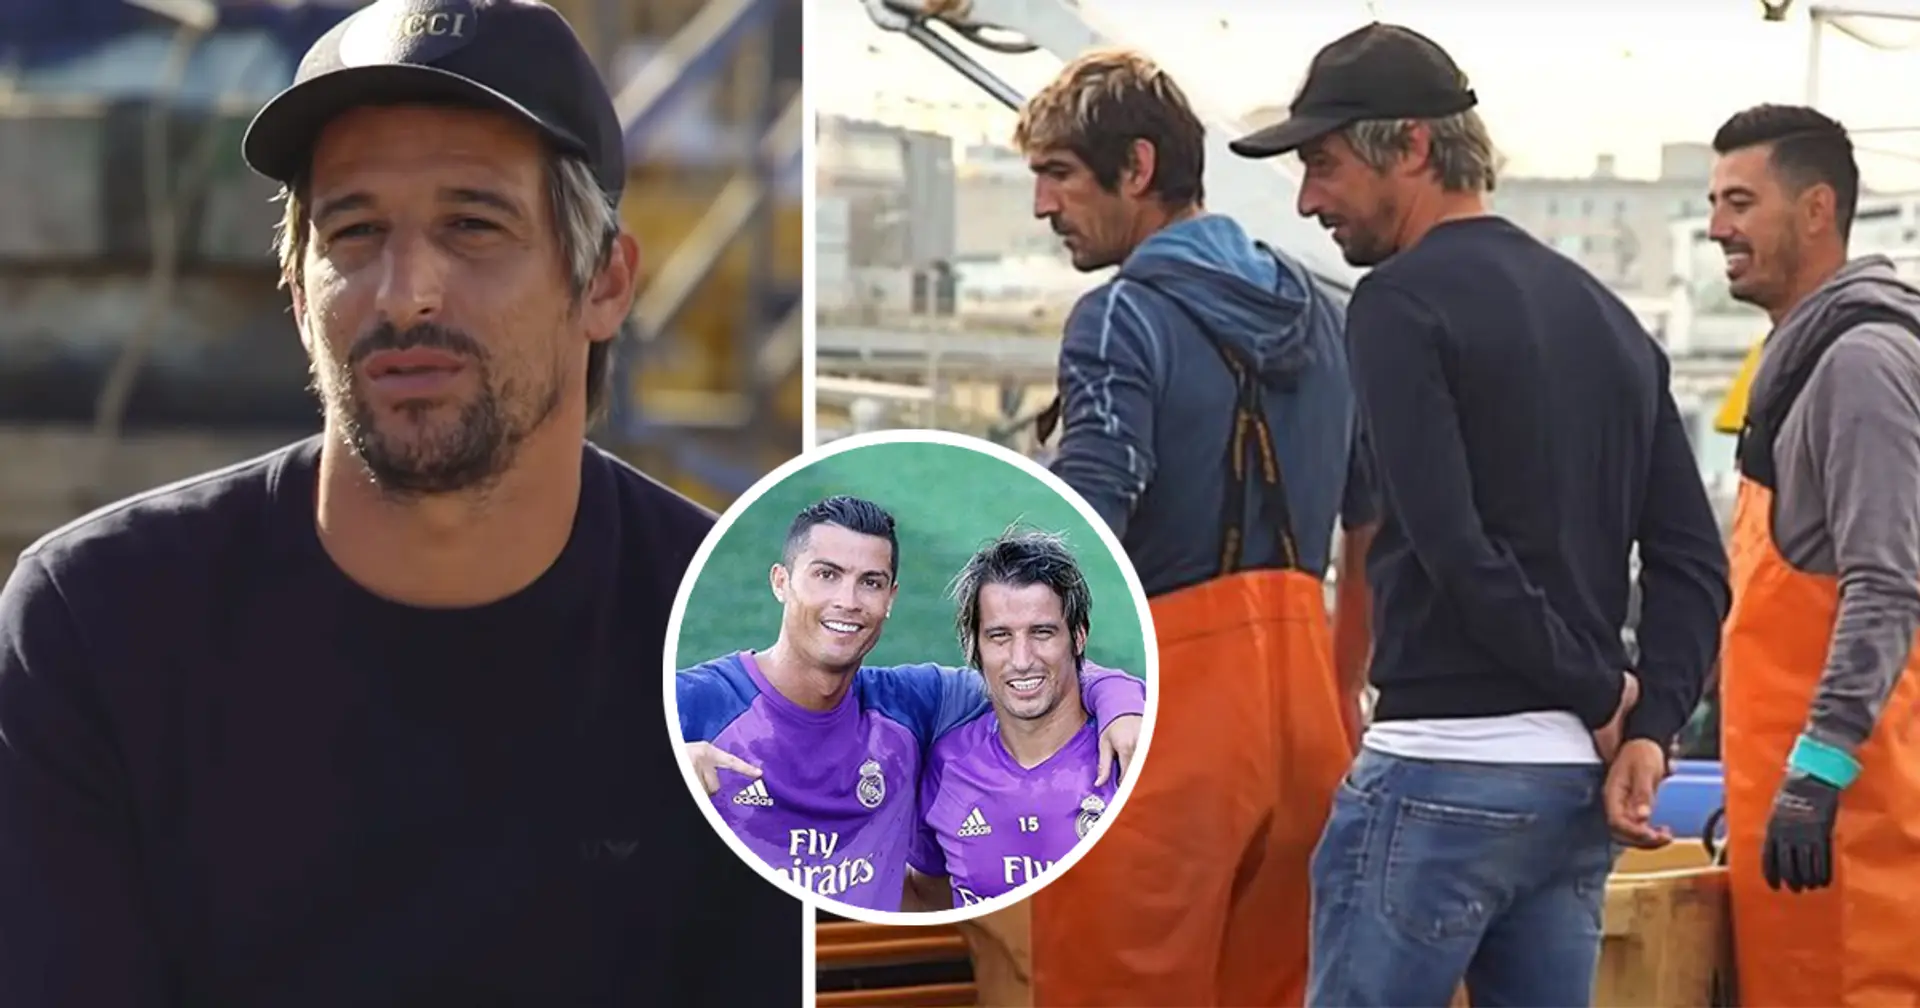 Do you remember Coentrao? He’s living a very different life after retiring from football